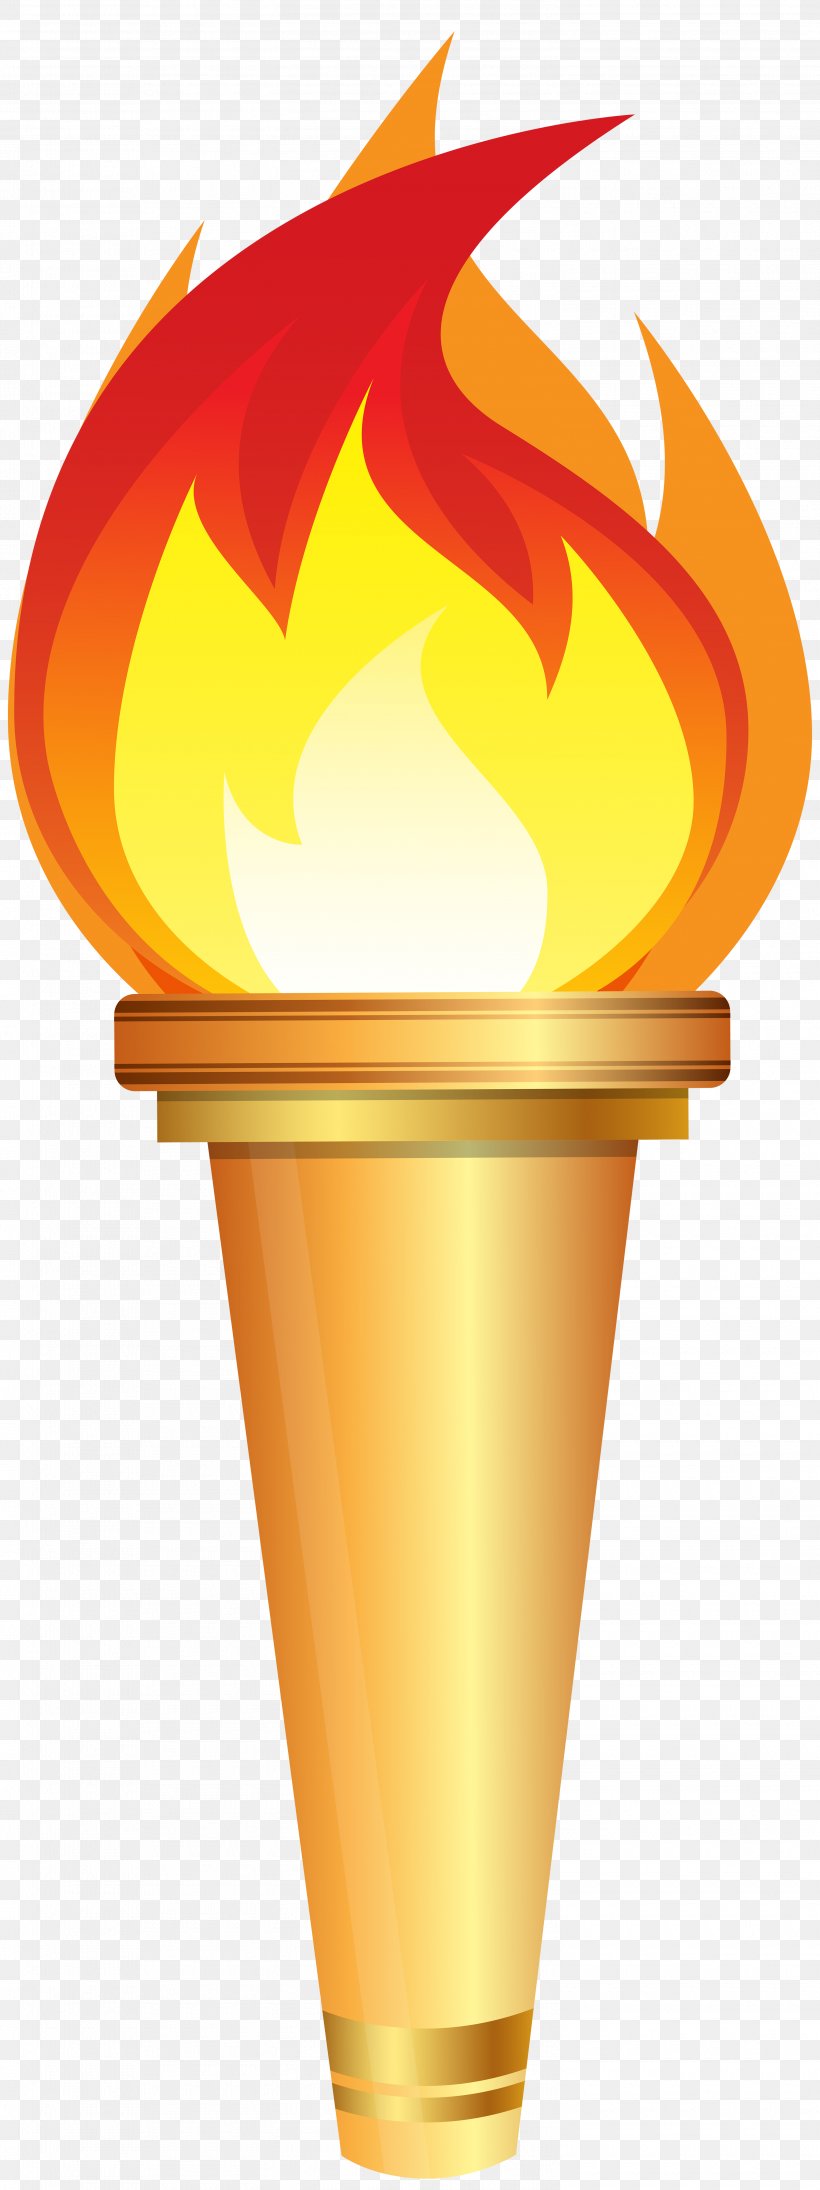 2018 Winter Olympics Torch Relay Olympic Games 2016 Summer Olympics Clip Art, PNG, 2995x8000px, Olympic Games, Food, Ice Cream, Ice Cream Cone, Olympic Flame Download Free